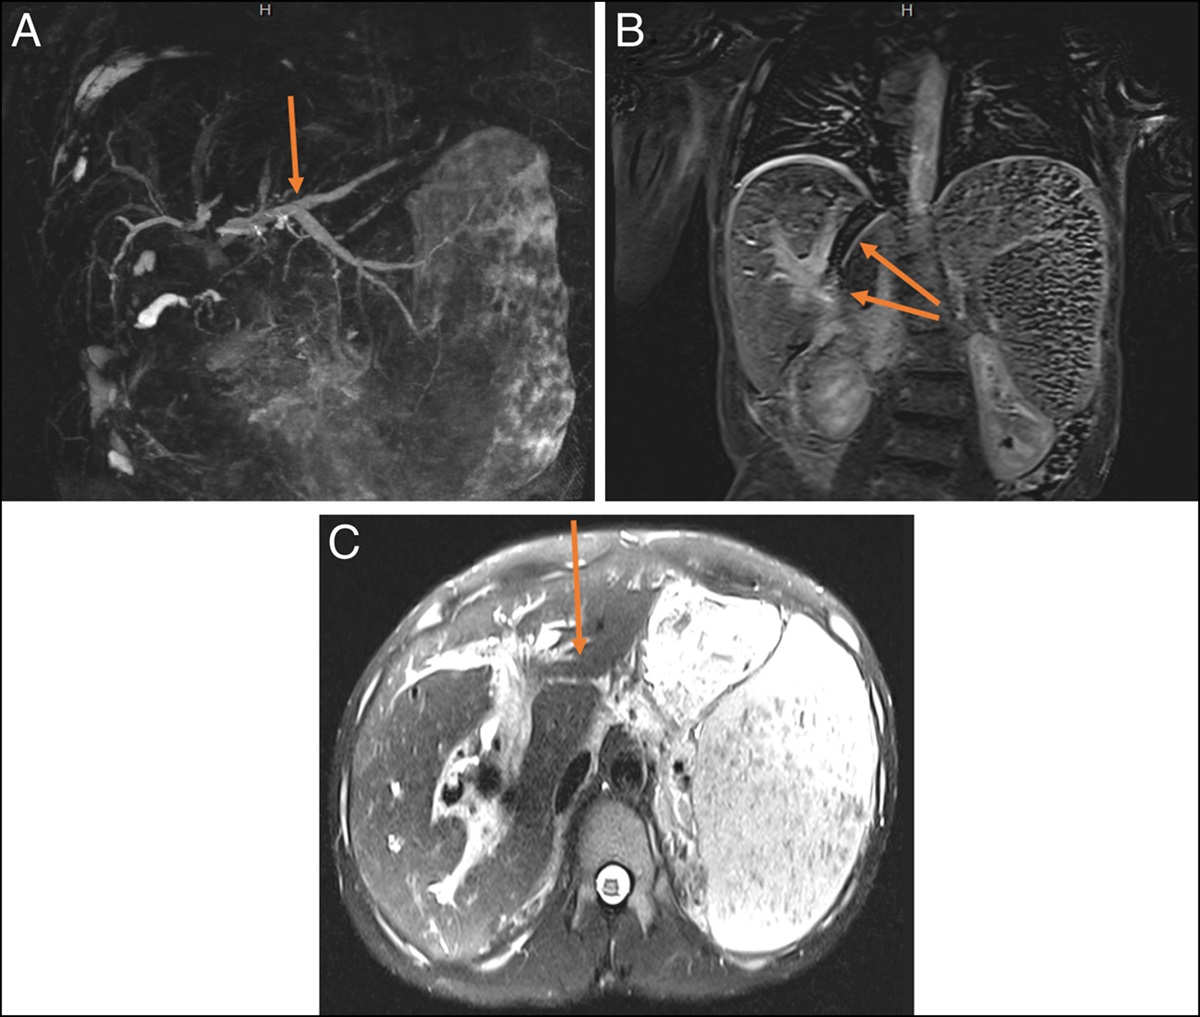 Bad Connection: Stent-to-Stent Fistulization After Common Bile Duct and Transjugular Intrahepatic Portosystemic Shunt Stenting